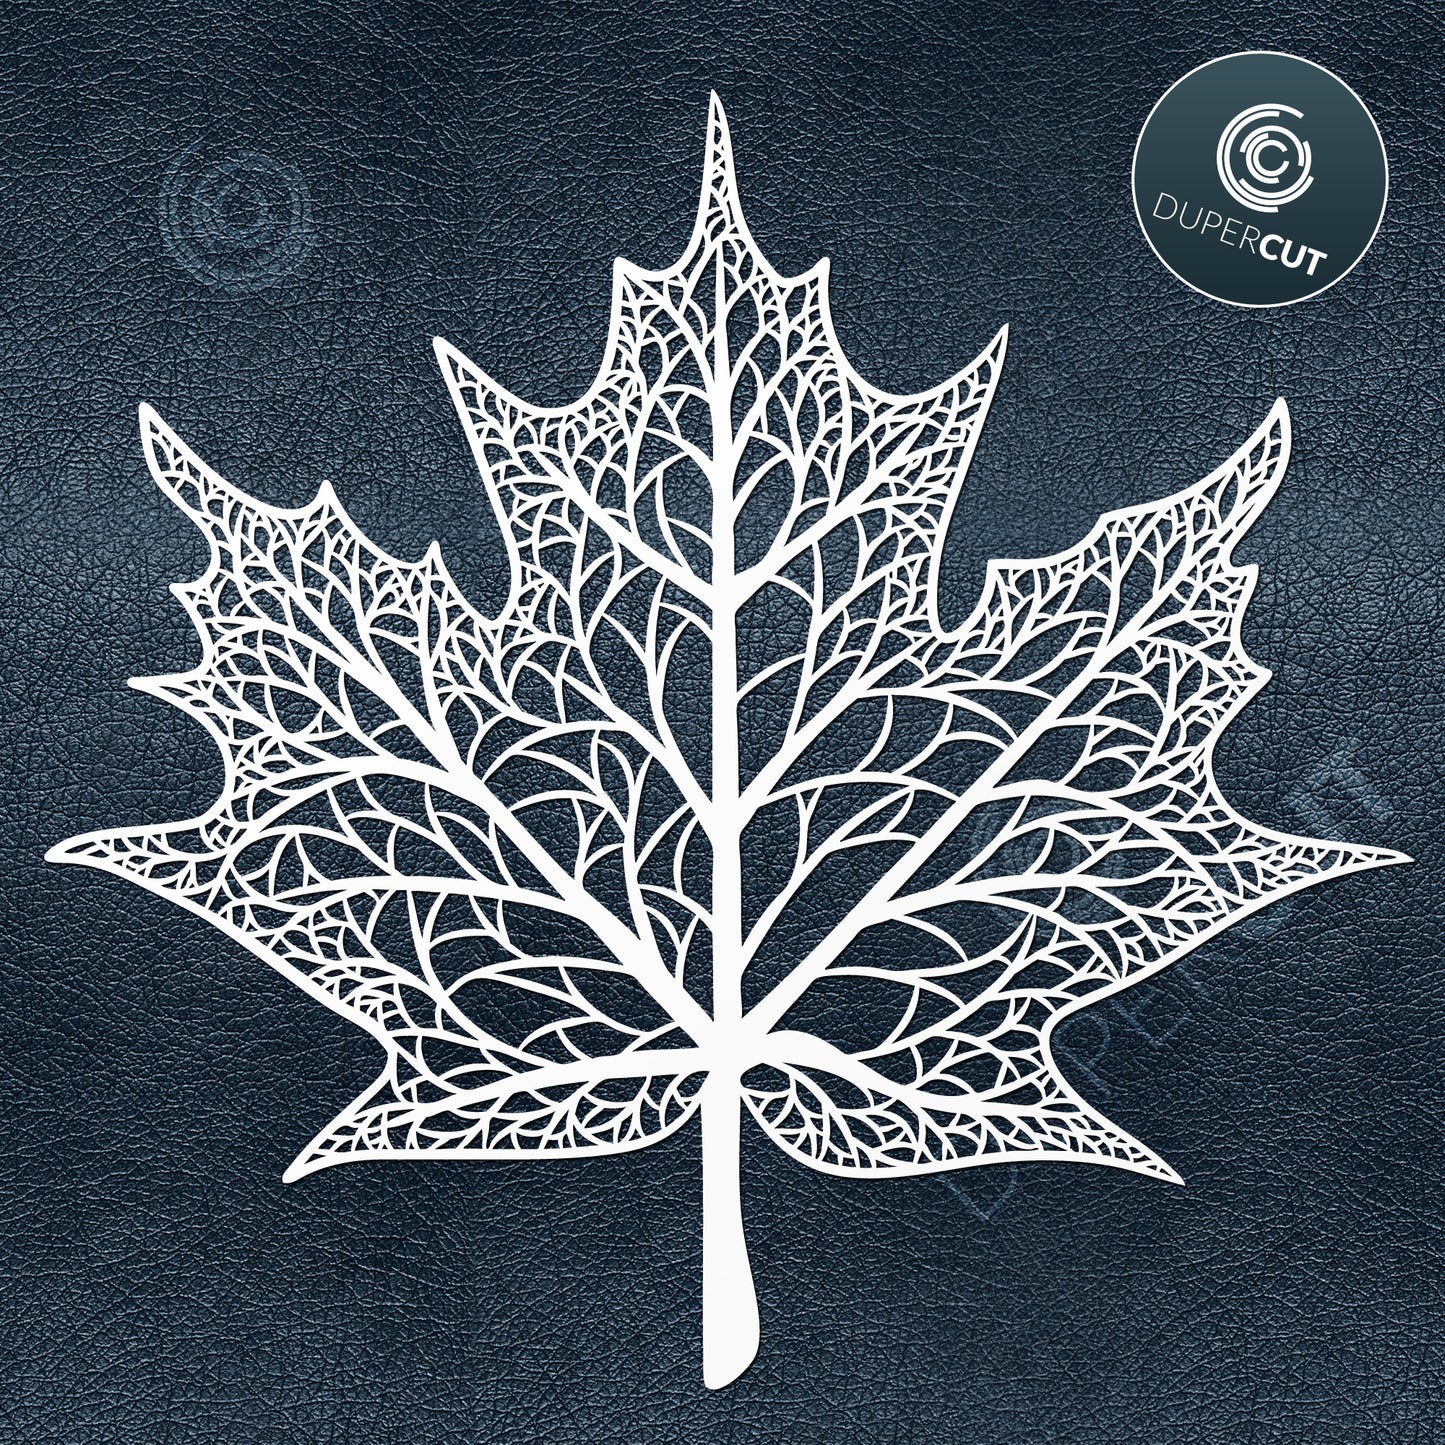 Detailed leaf design. SVG PNG DXF files Paper cutting template for personal or commercial use. Vinyl template cutting files for Cricut, Glowforge, Silhouette, CNC